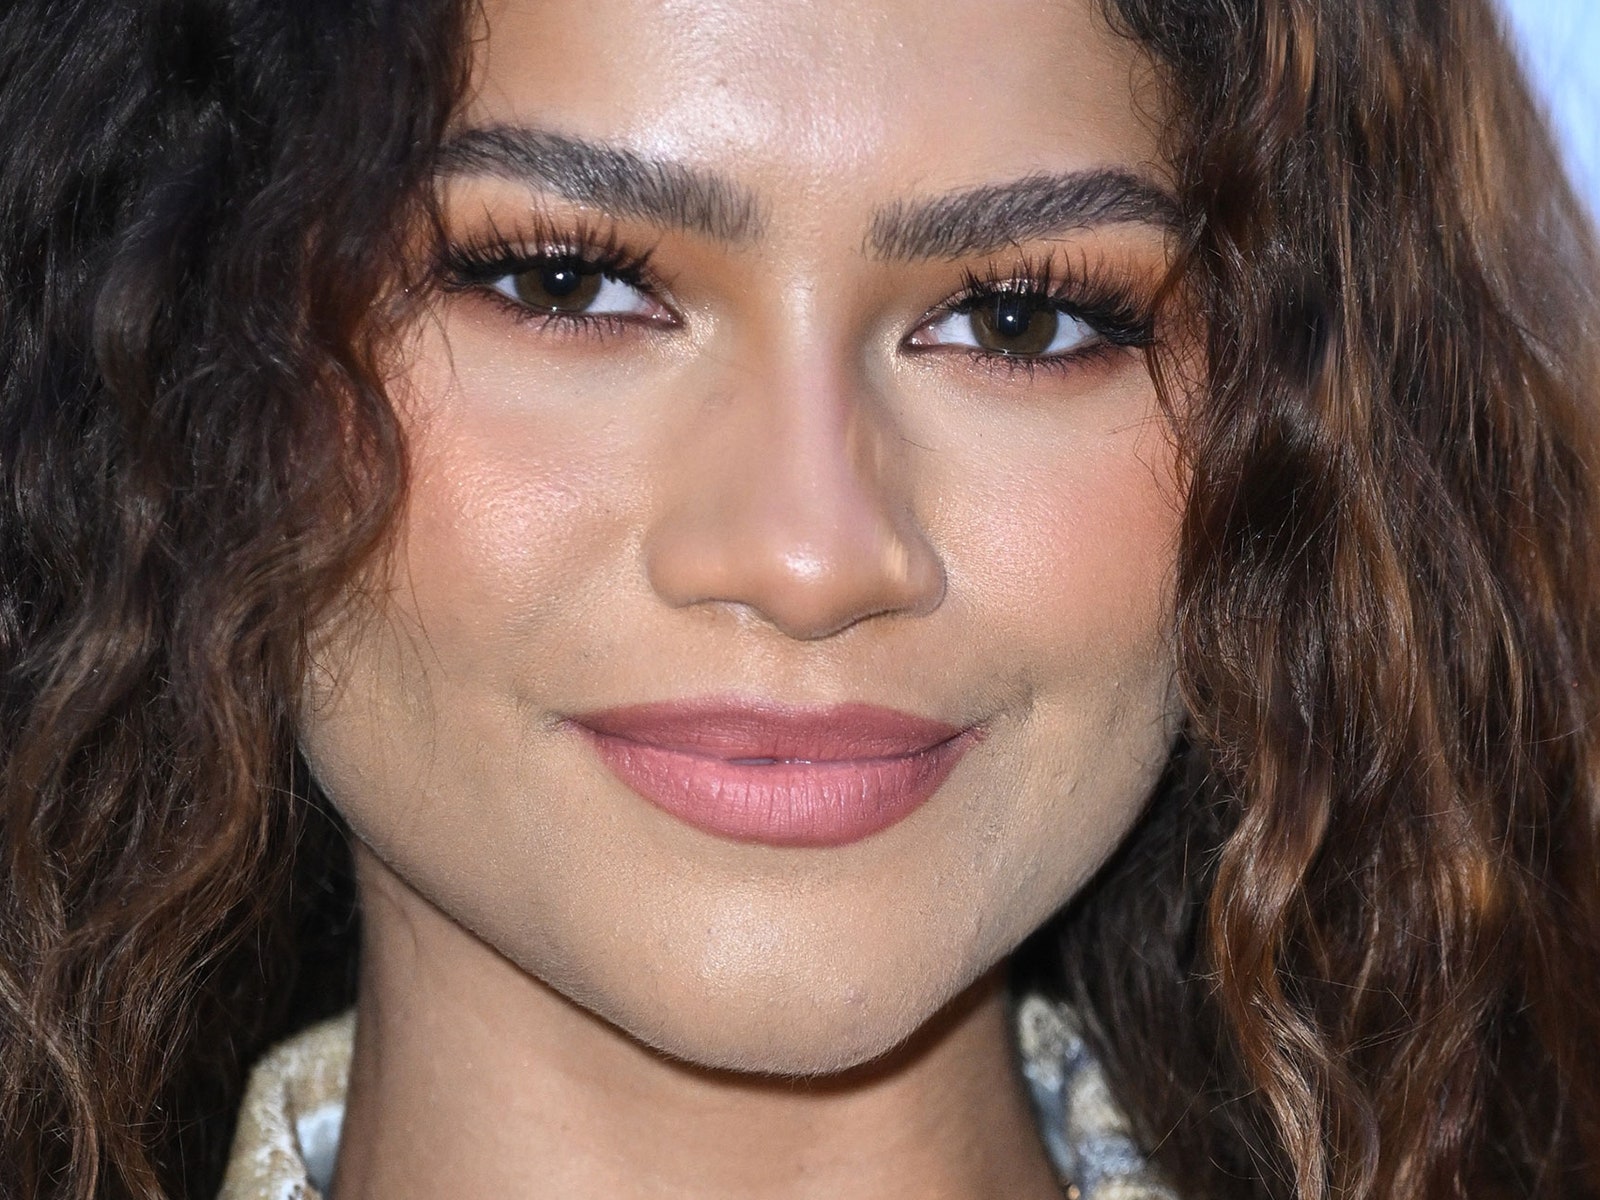 Zendaya just revealed the perfect glow-up using the ‘C’ highlighter trick